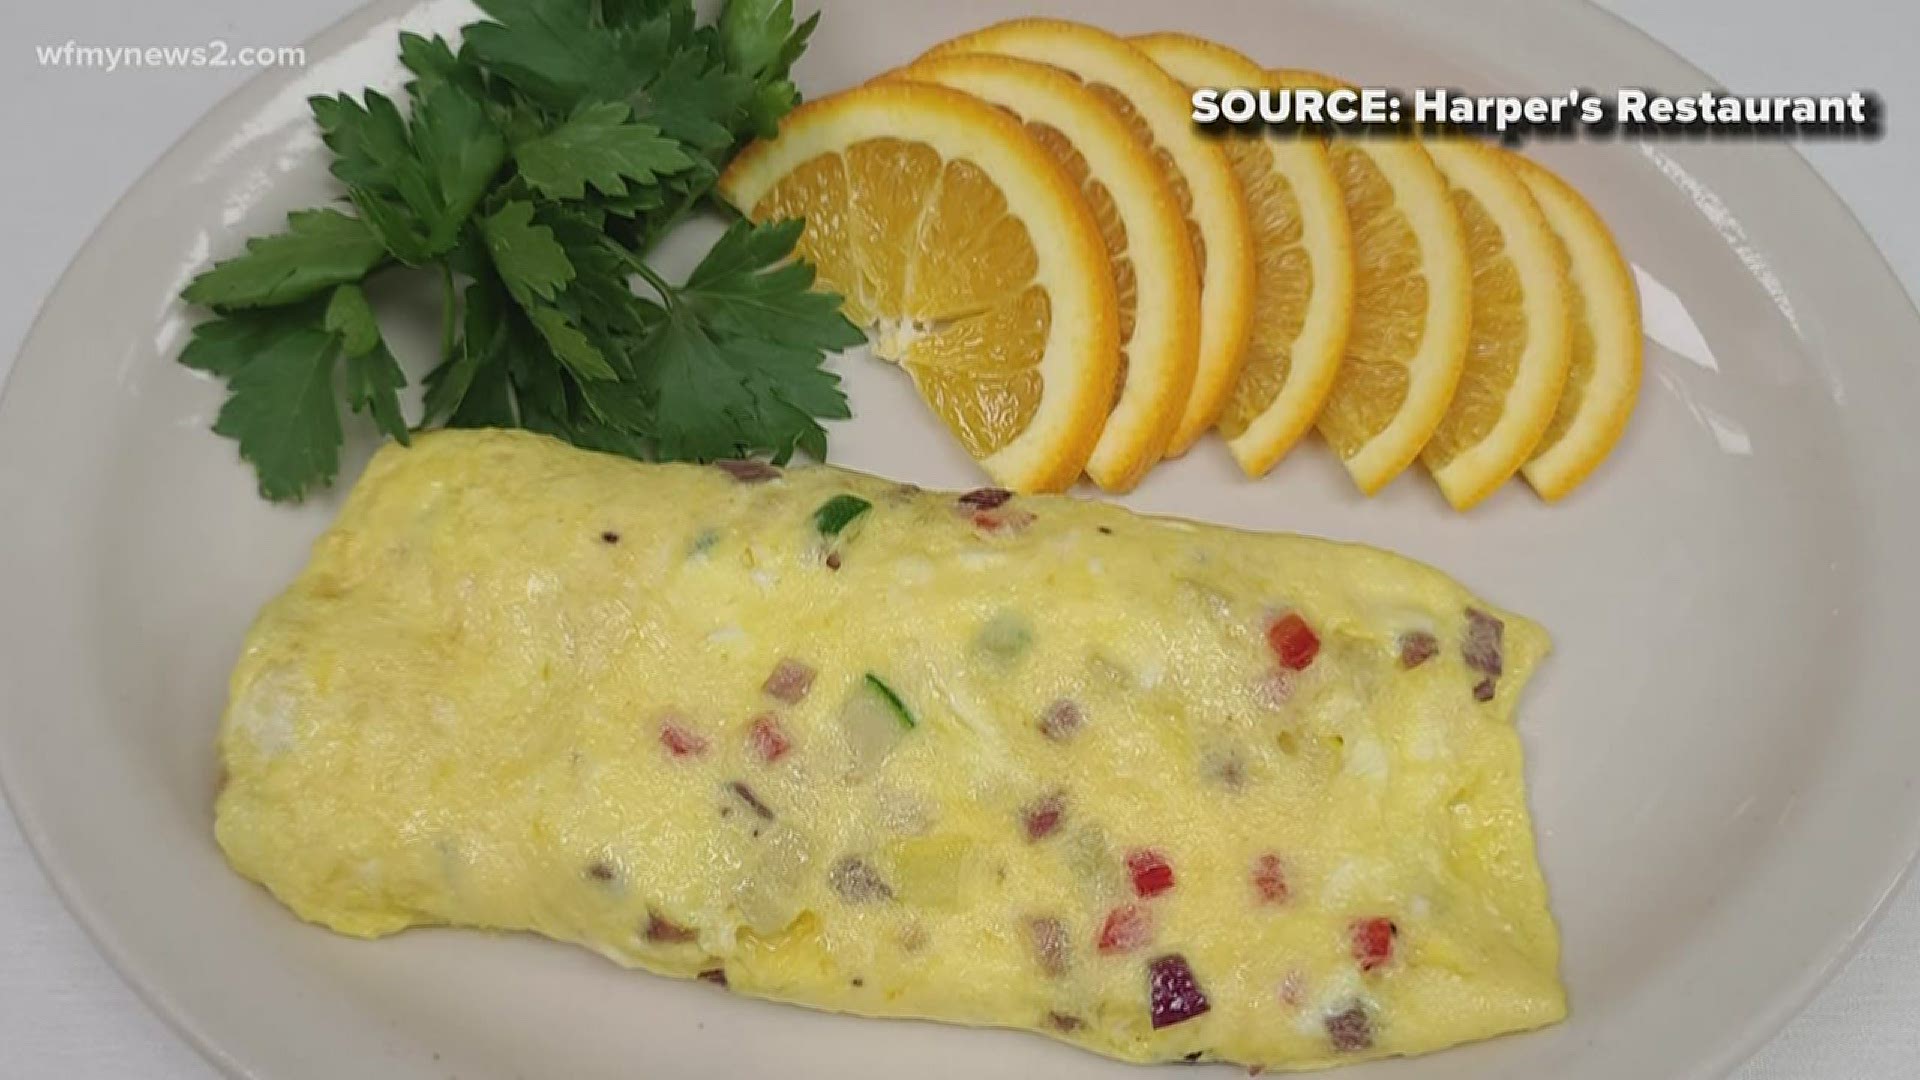 You may not want to leave the house this weekend. So treat mom to this tasty omelet!